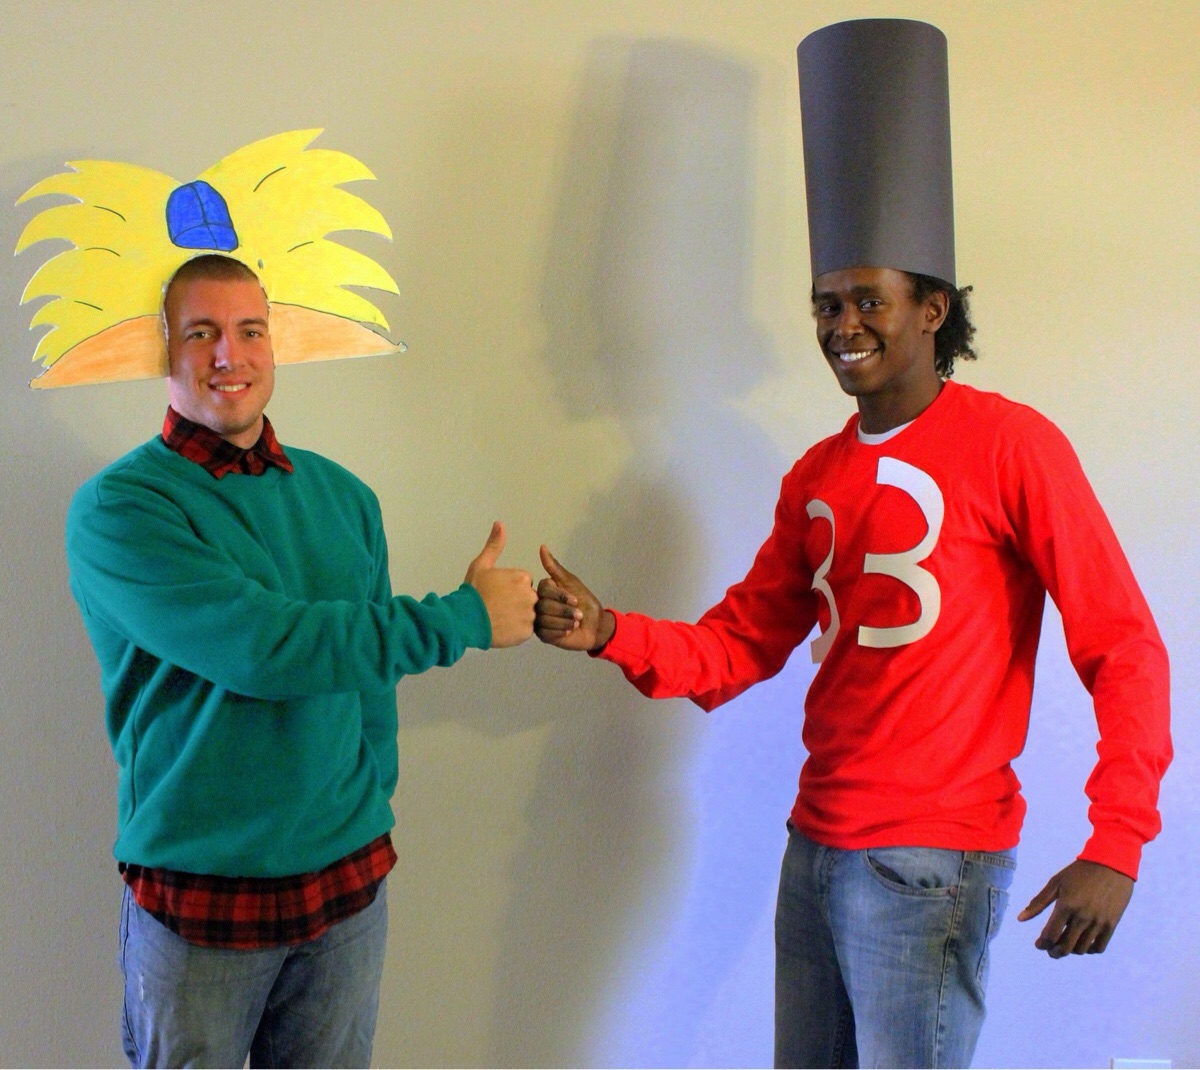 Halloween Costume Idea for Groups & Couples# 8- Arnold and Gerald.